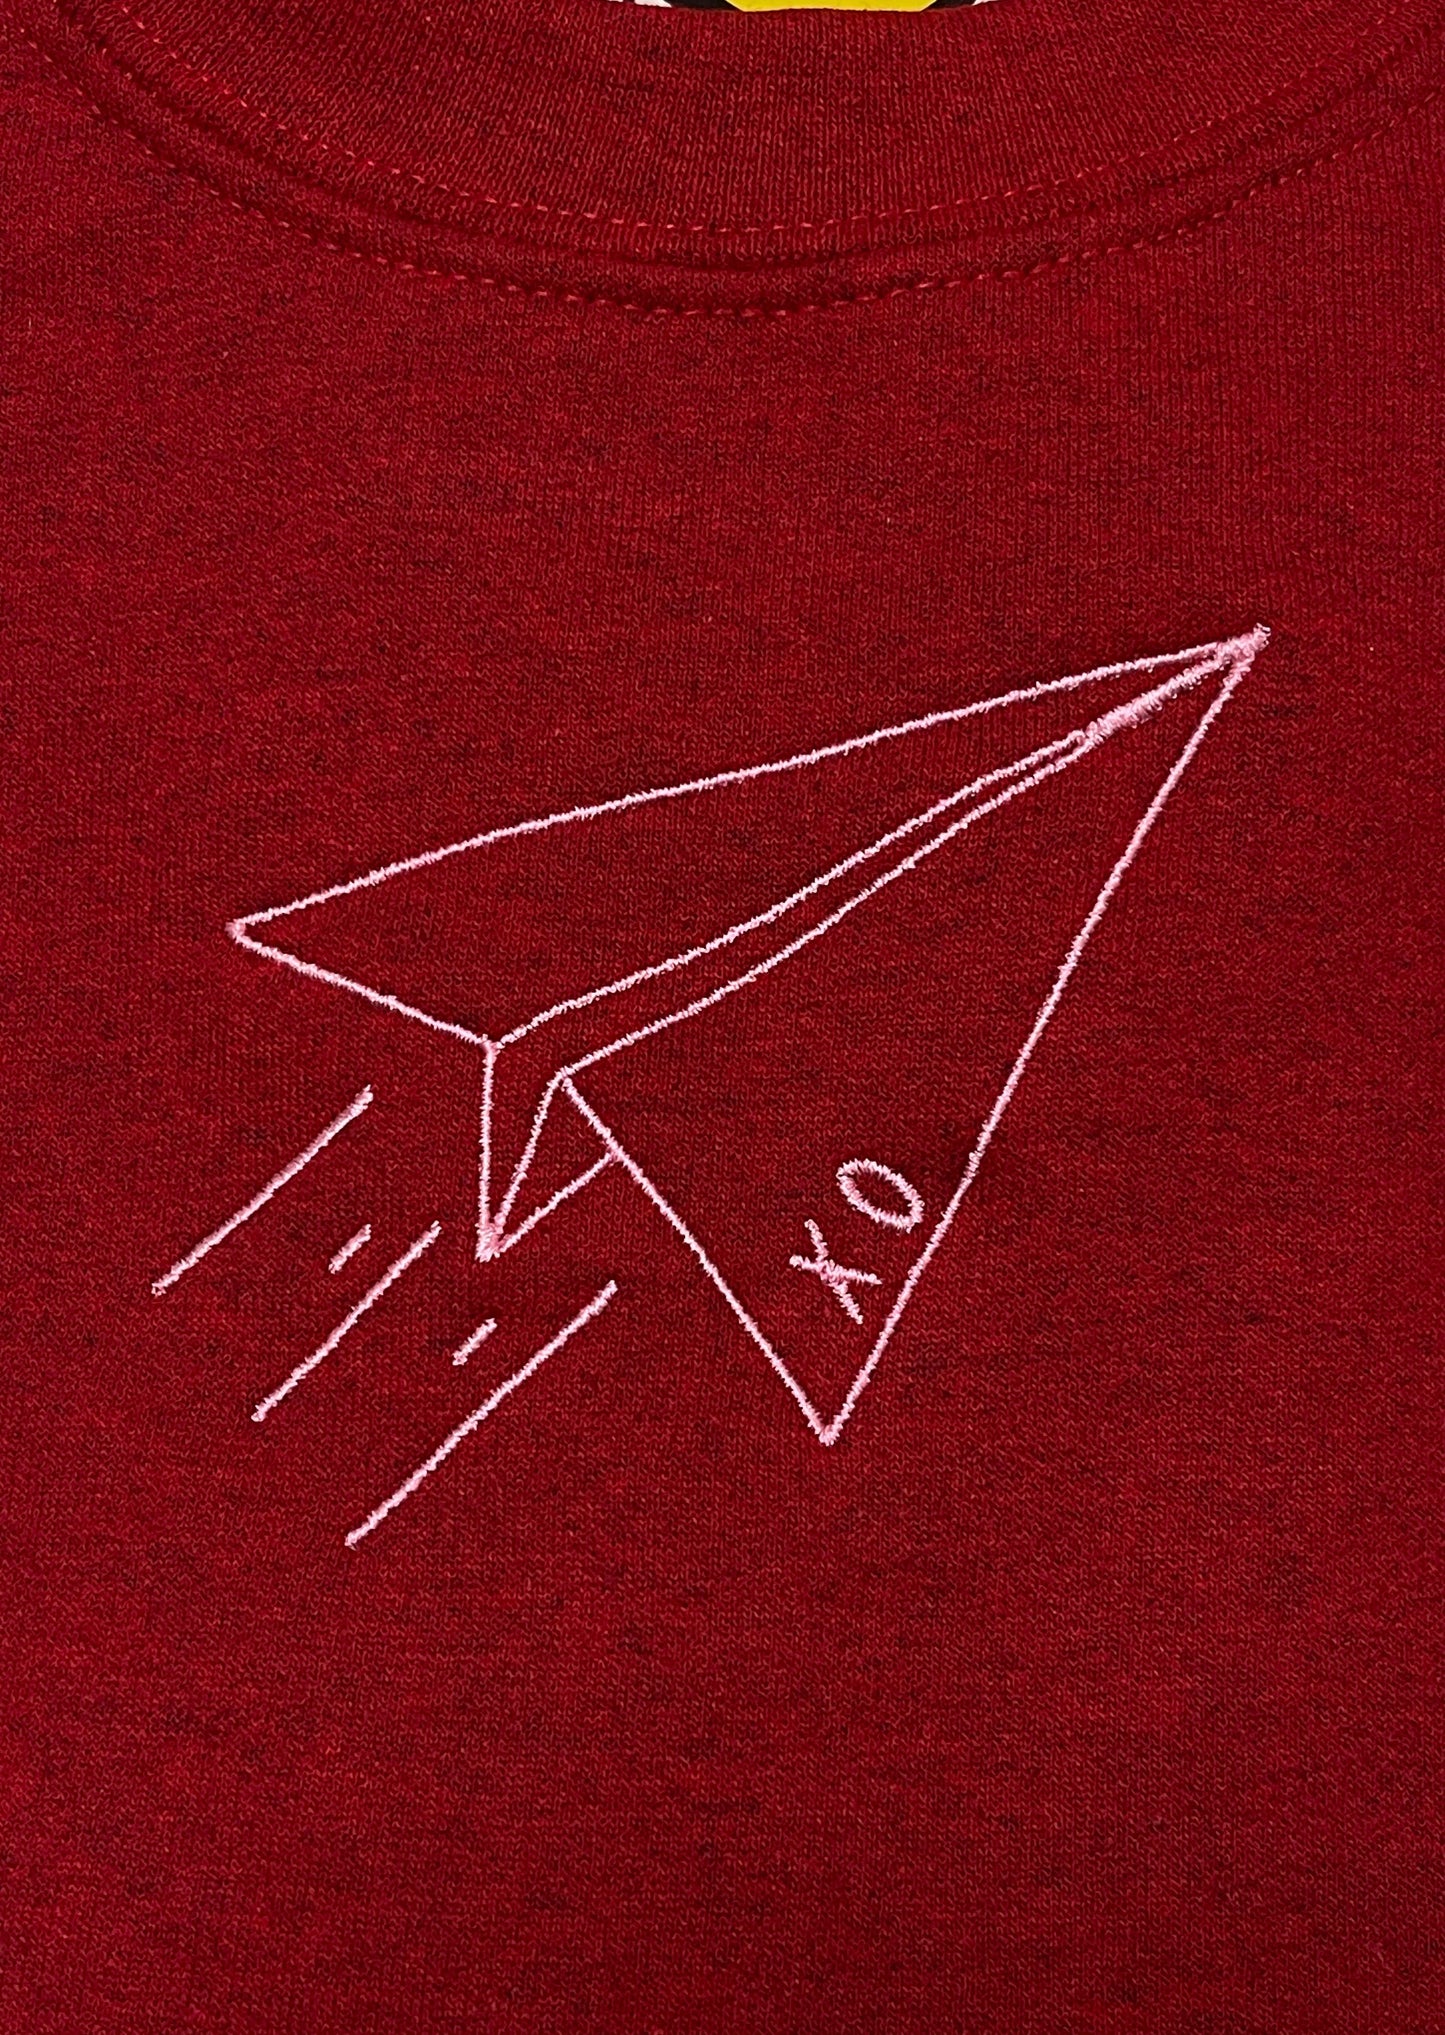 Paper Airplane Embroidery